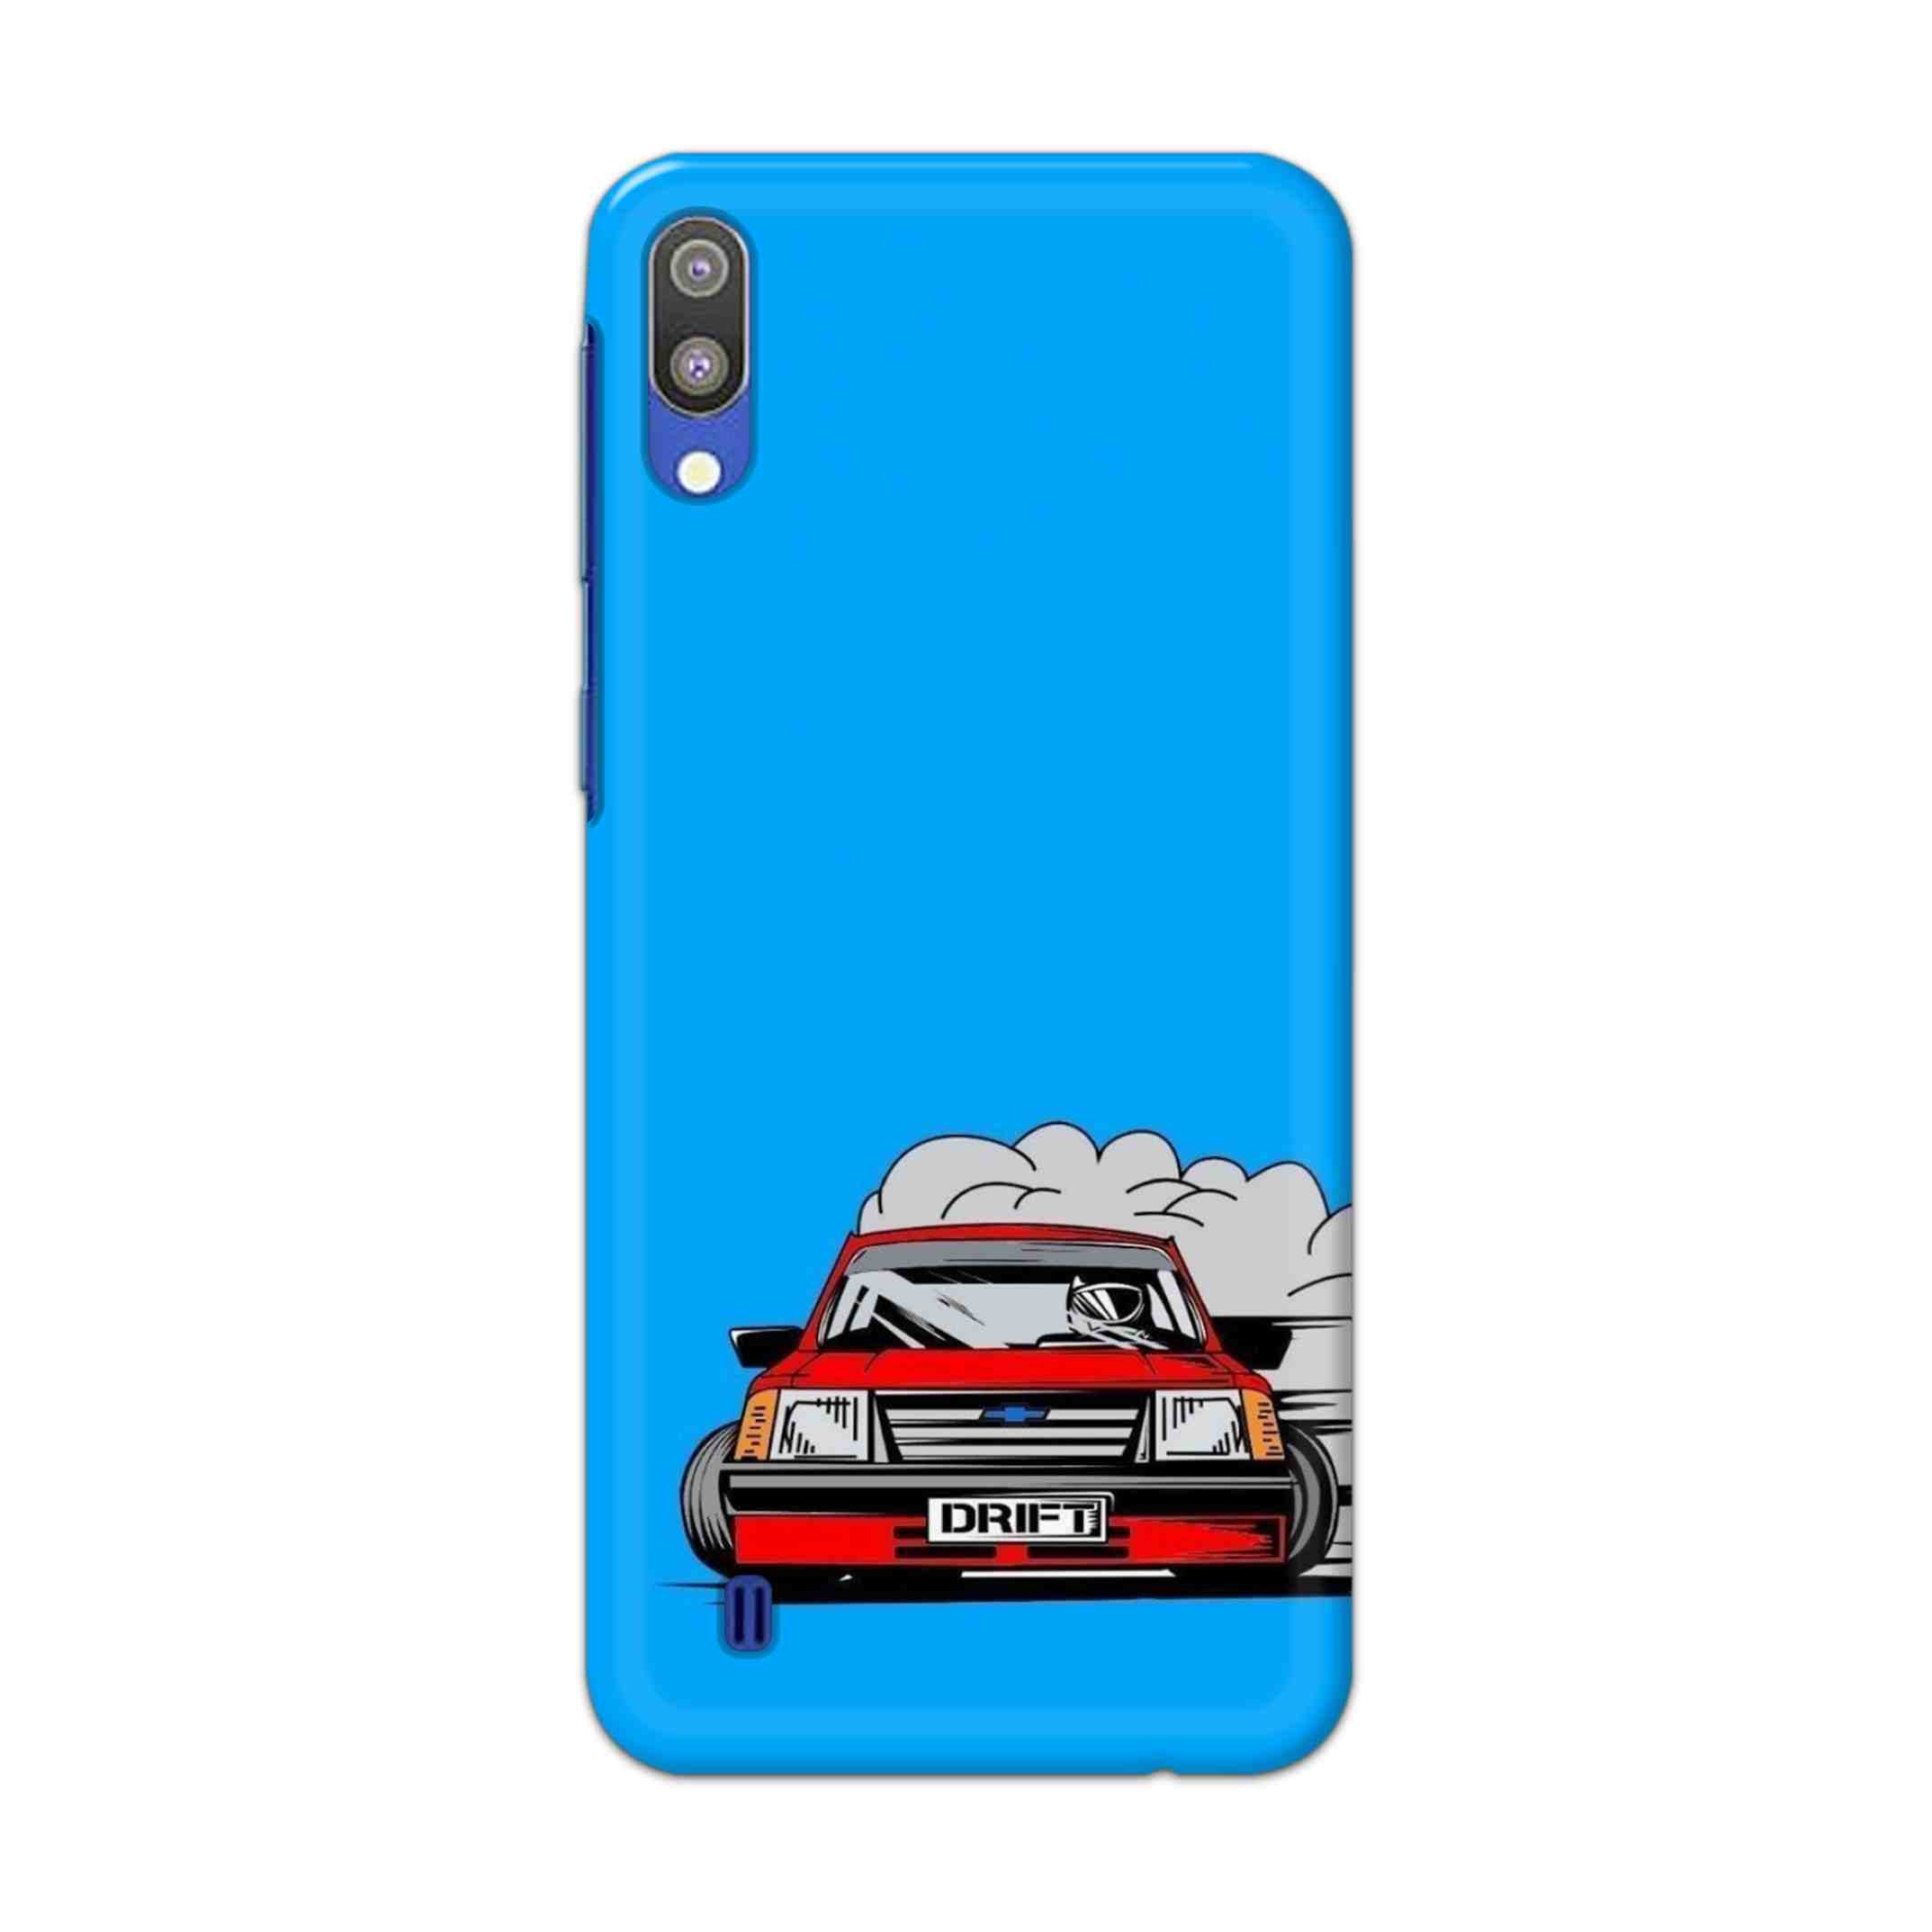 Buy Drift Hard Back Mobile Phone Case Cover For Samsung Galaxy M10 Online